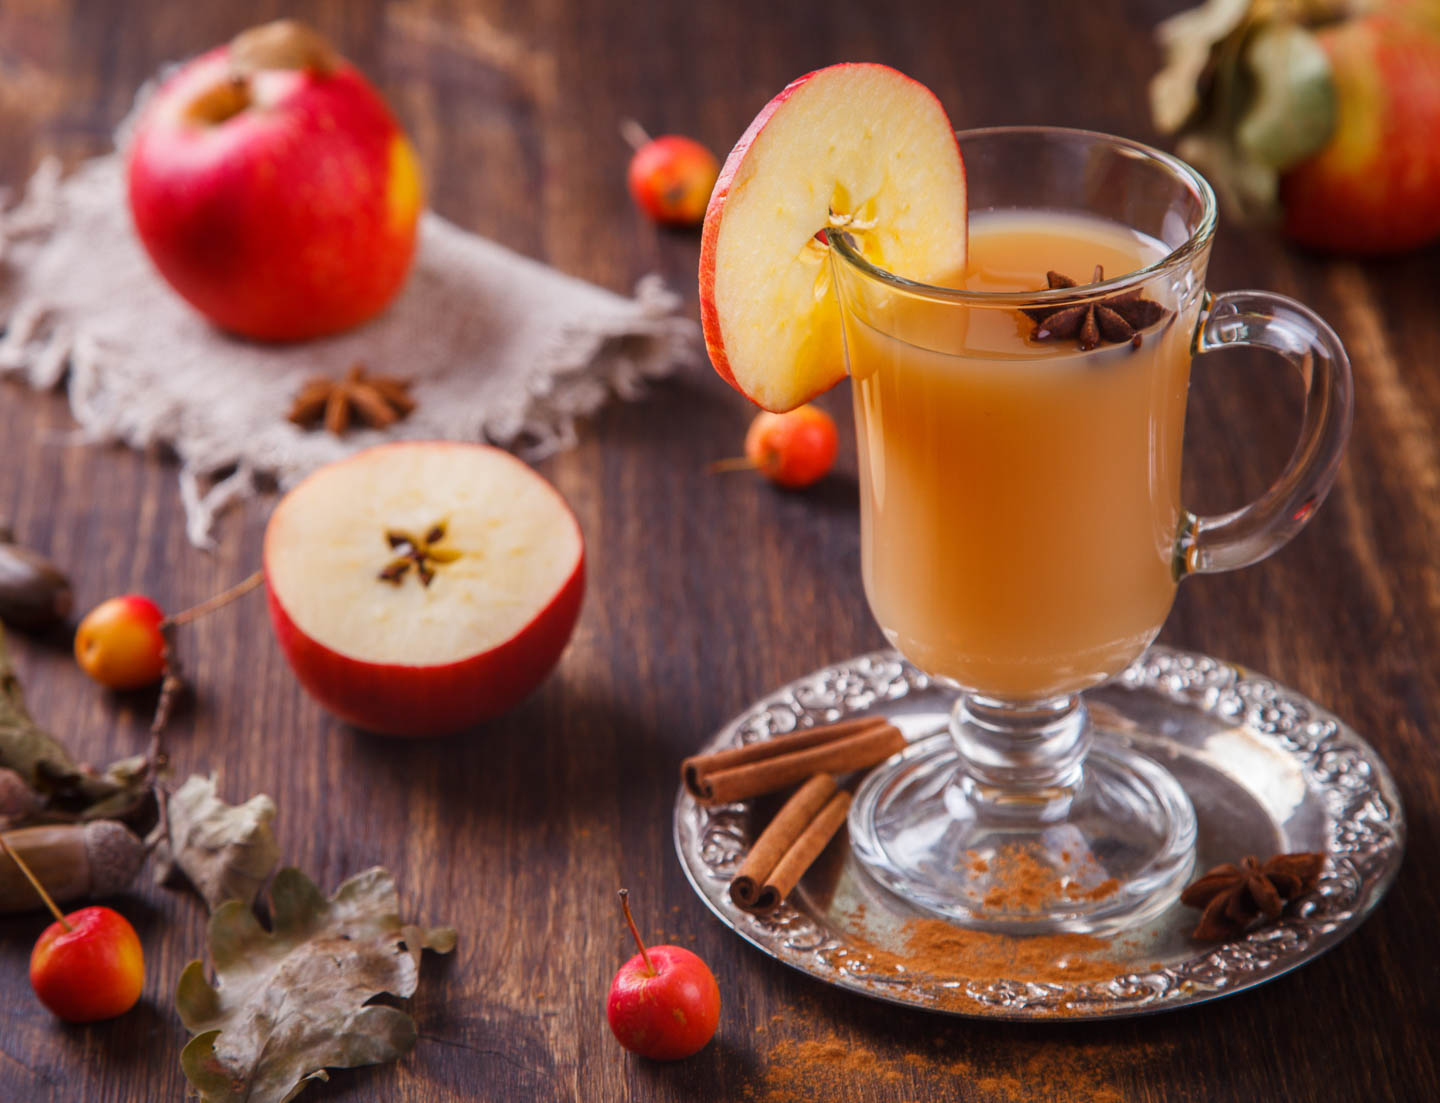 homemade spiced apple cider in a glass with a slice of apple for garnish